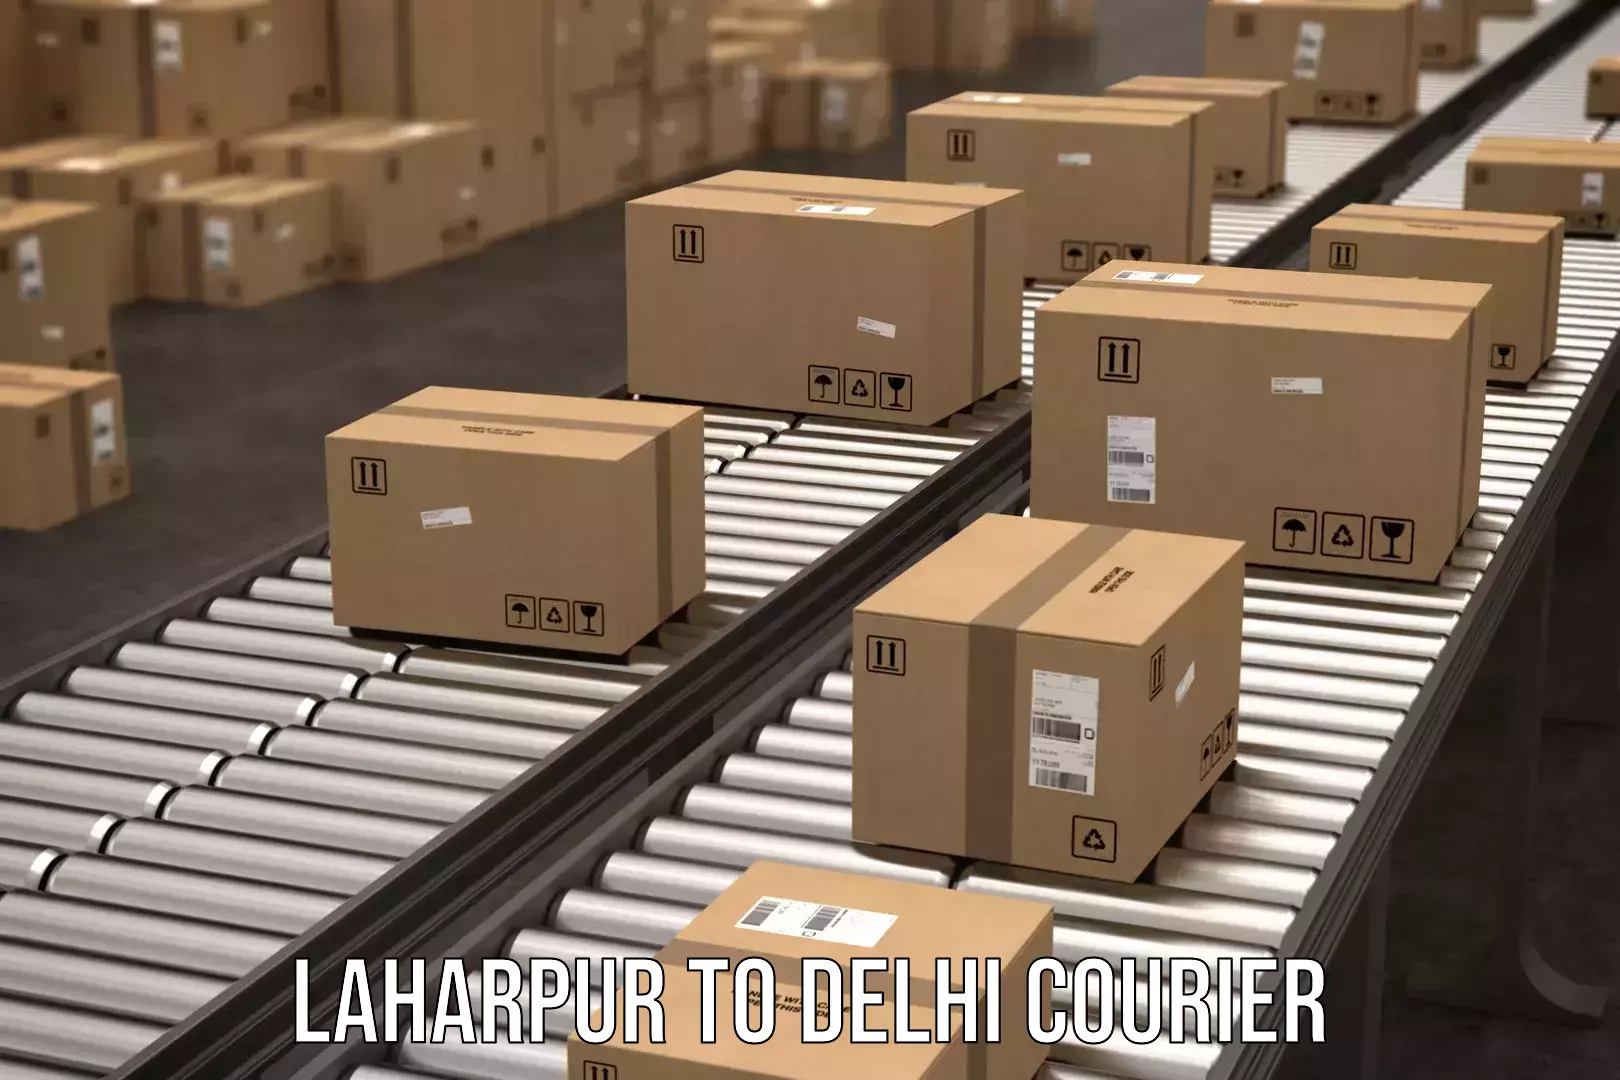 Sustainable shipping practices Laharpur to Lodhi Road